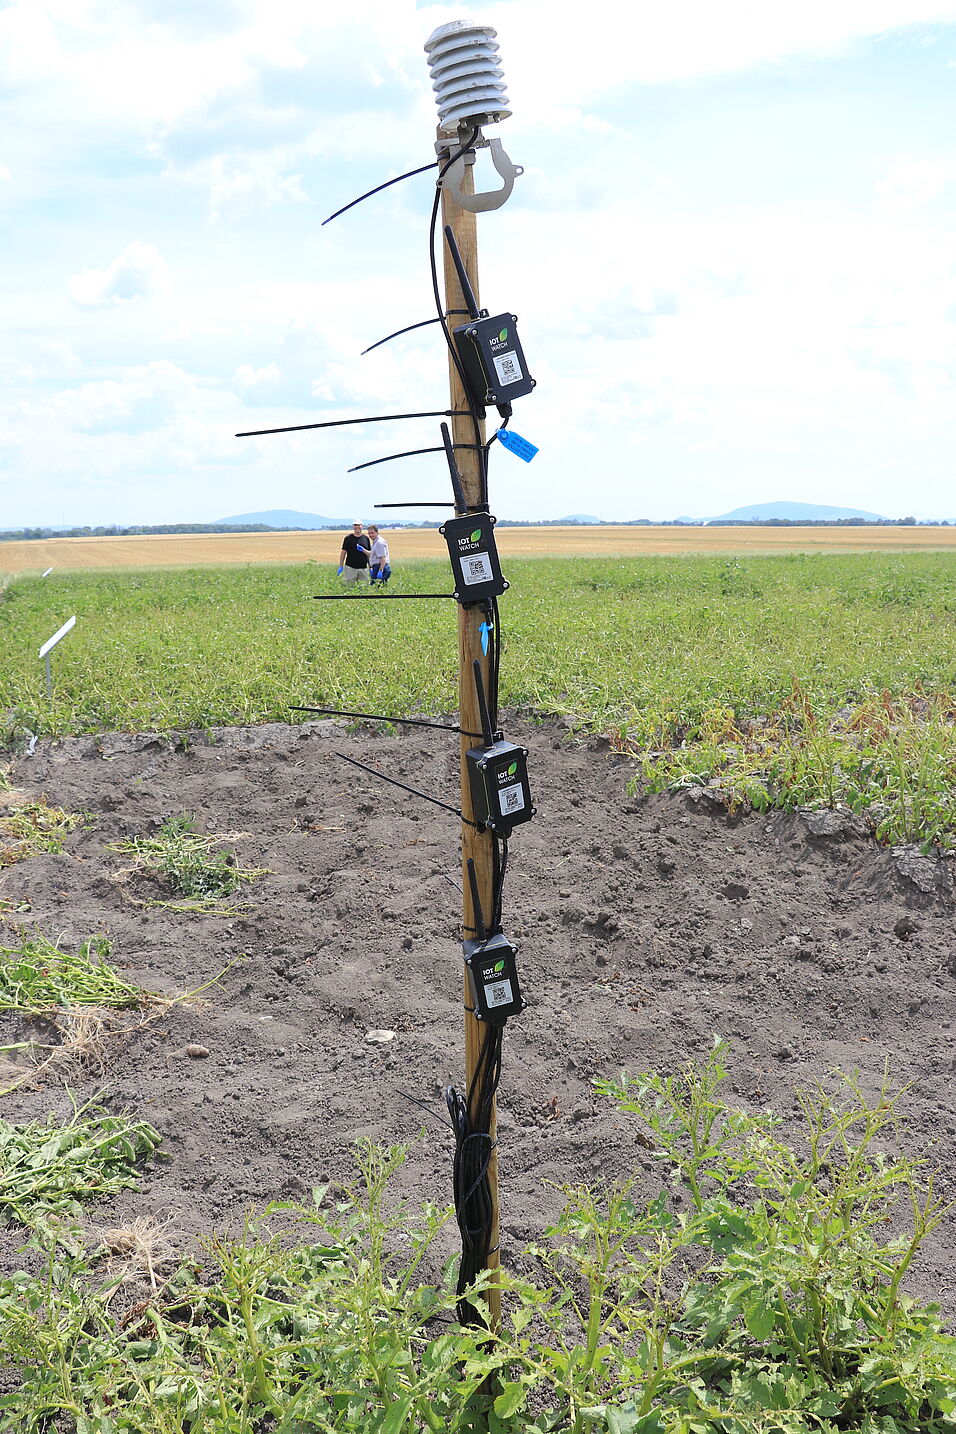 On May 2, environmental sensors including soil sensors were installed at each trial site to measure air and soil temperature, air humidity and soil moisture. 